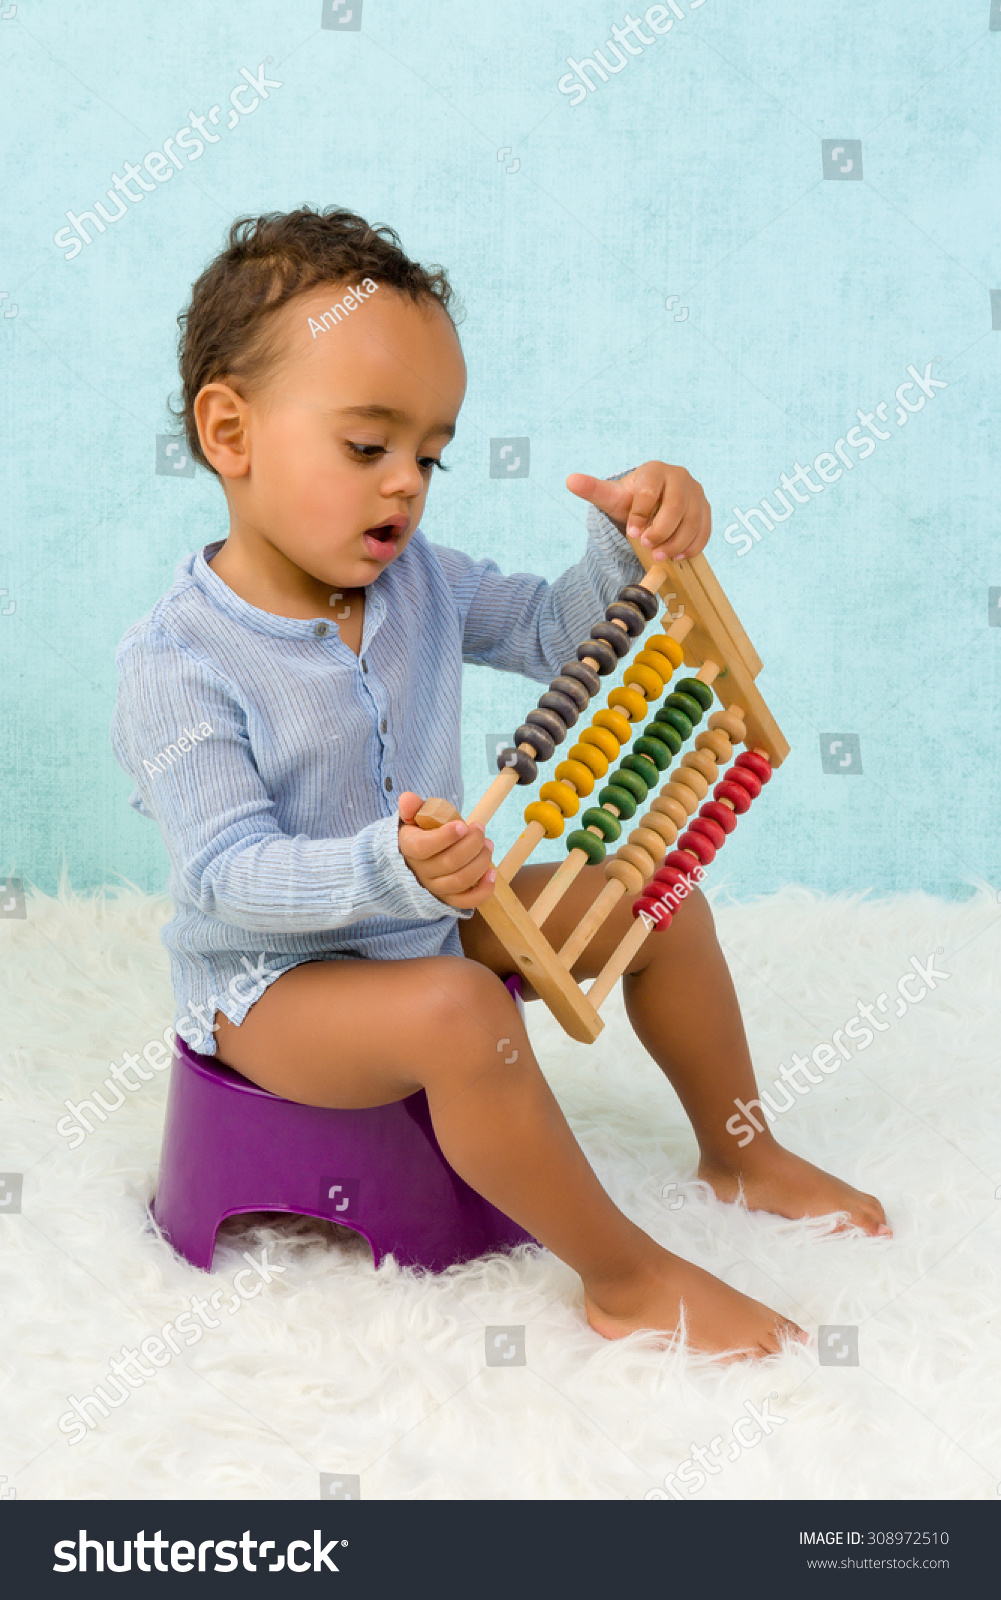 Potty Training Of A Cute African Toddler Boy Playing With An Abacus ...